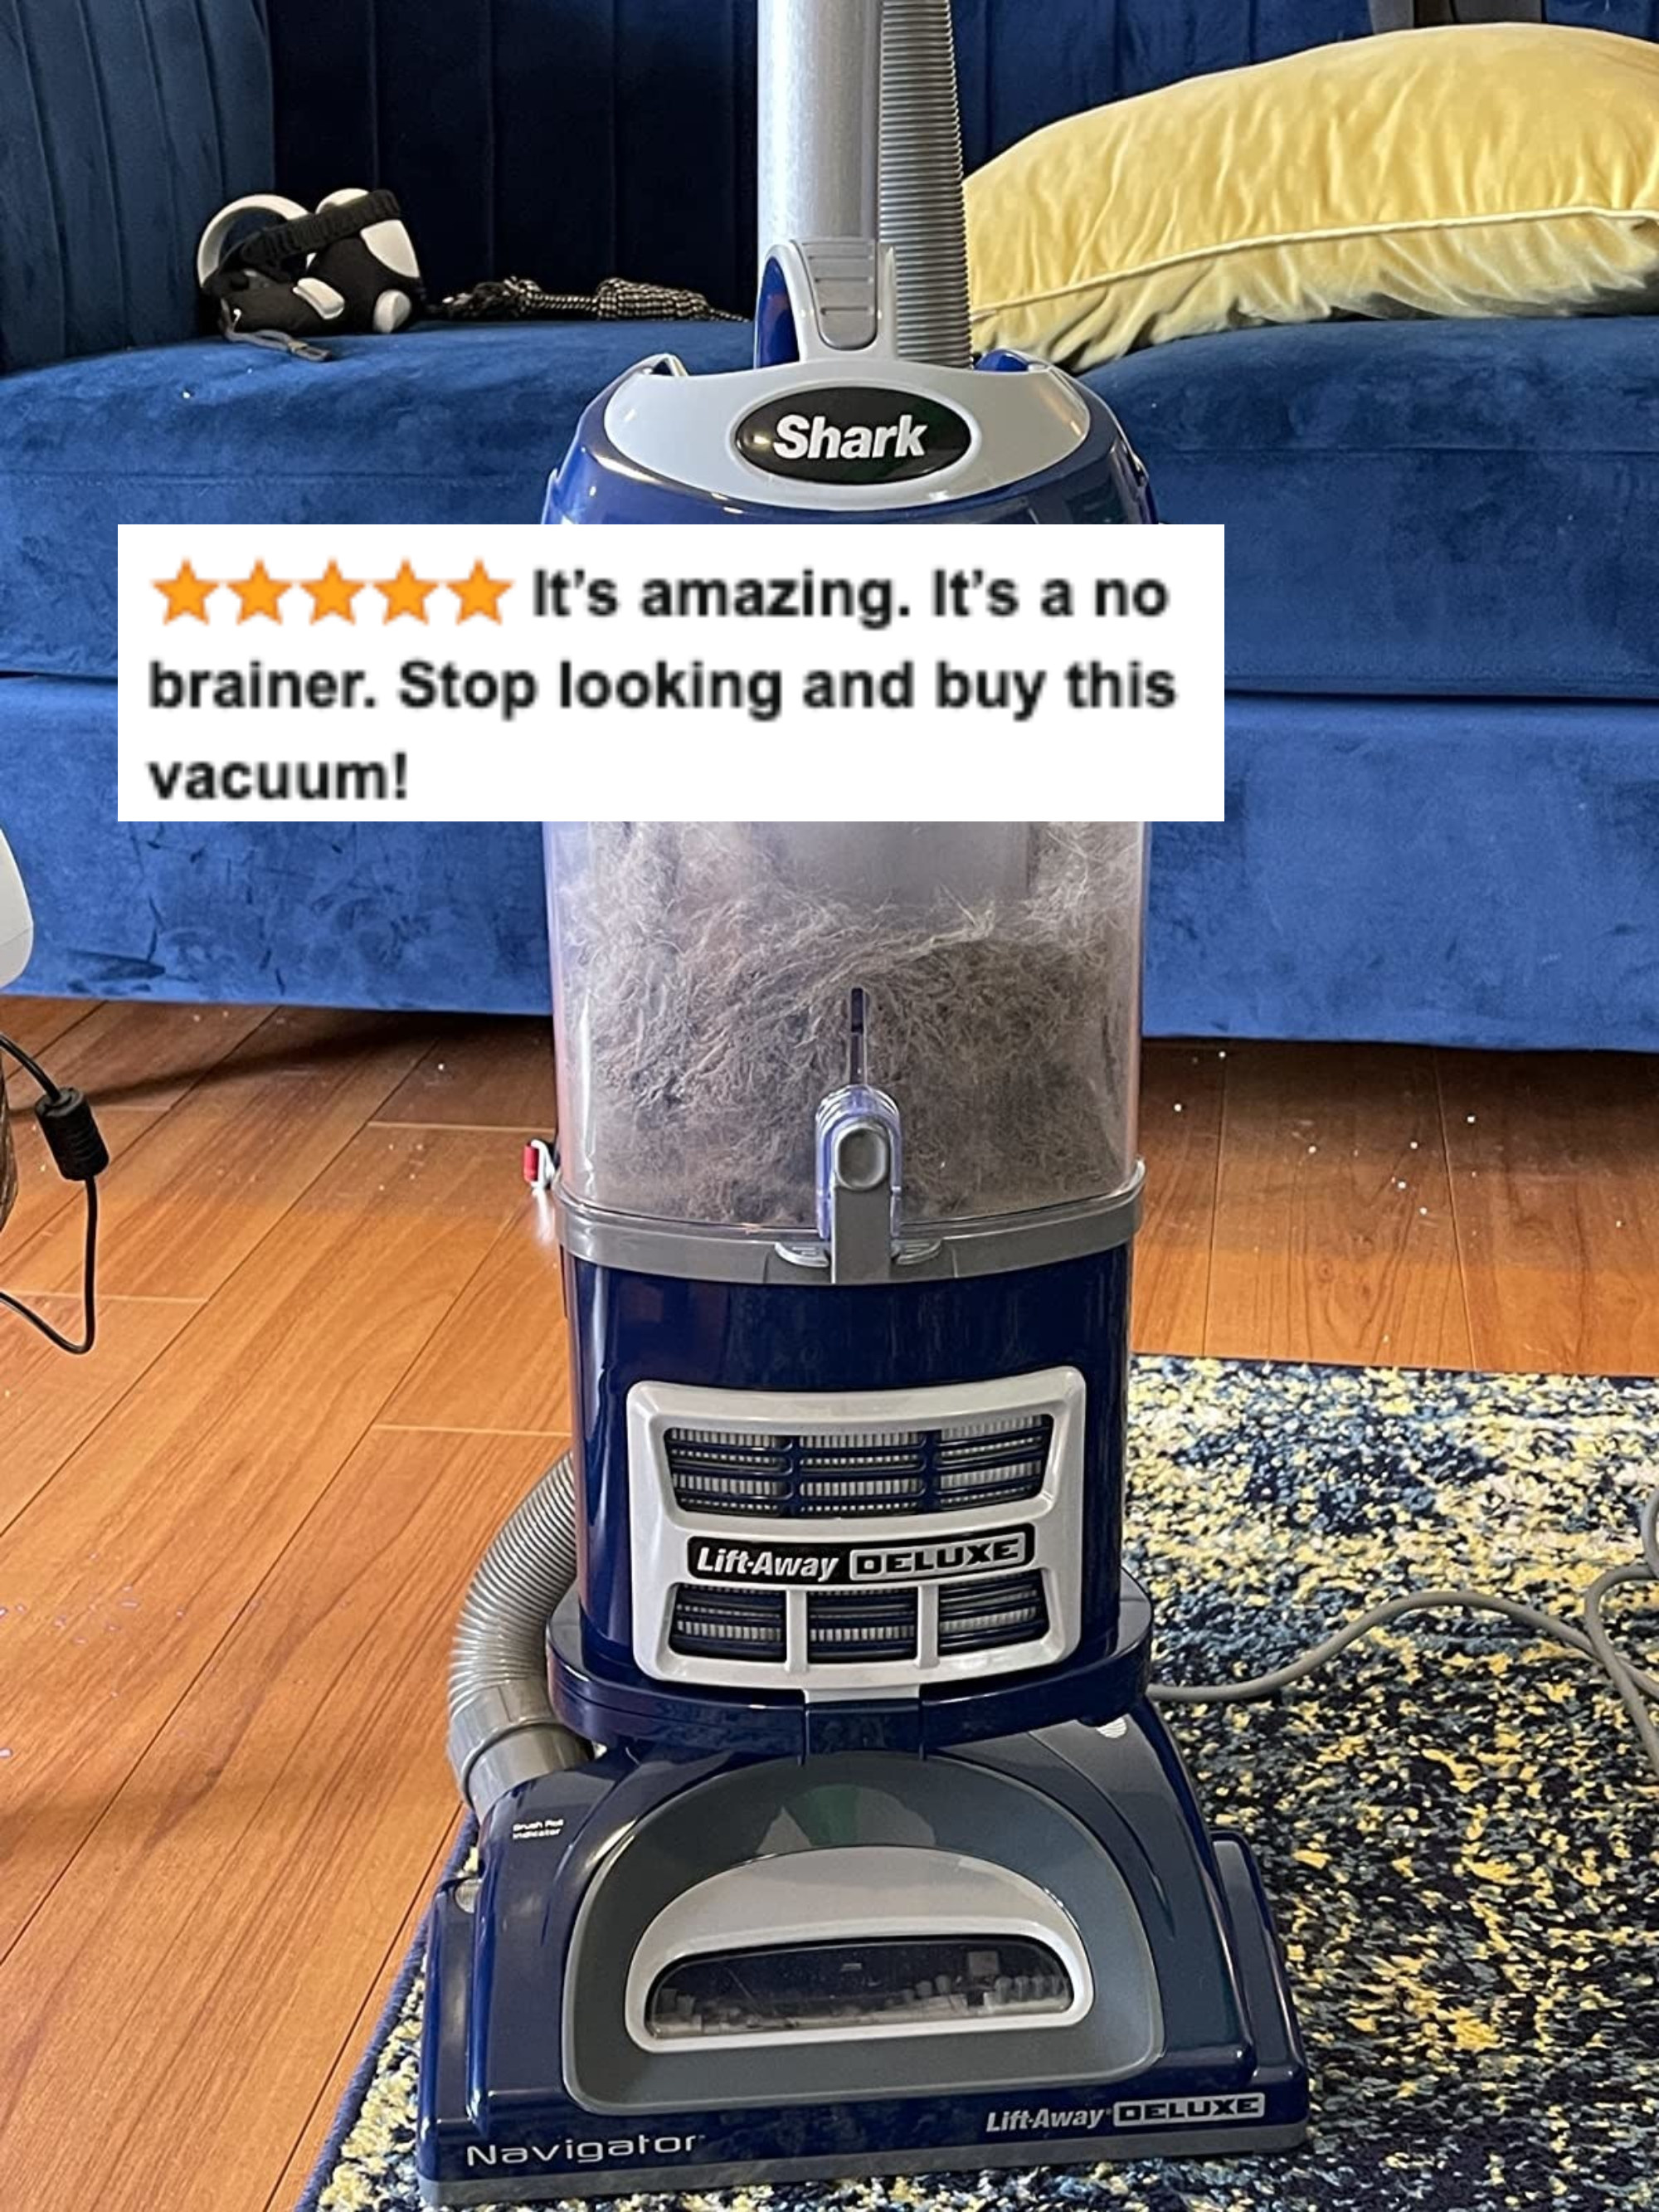 A reviewer's image of the dust-filled vacuum with five star review text saying it's amazing it's a no brainer stop looking and buy this vacuum